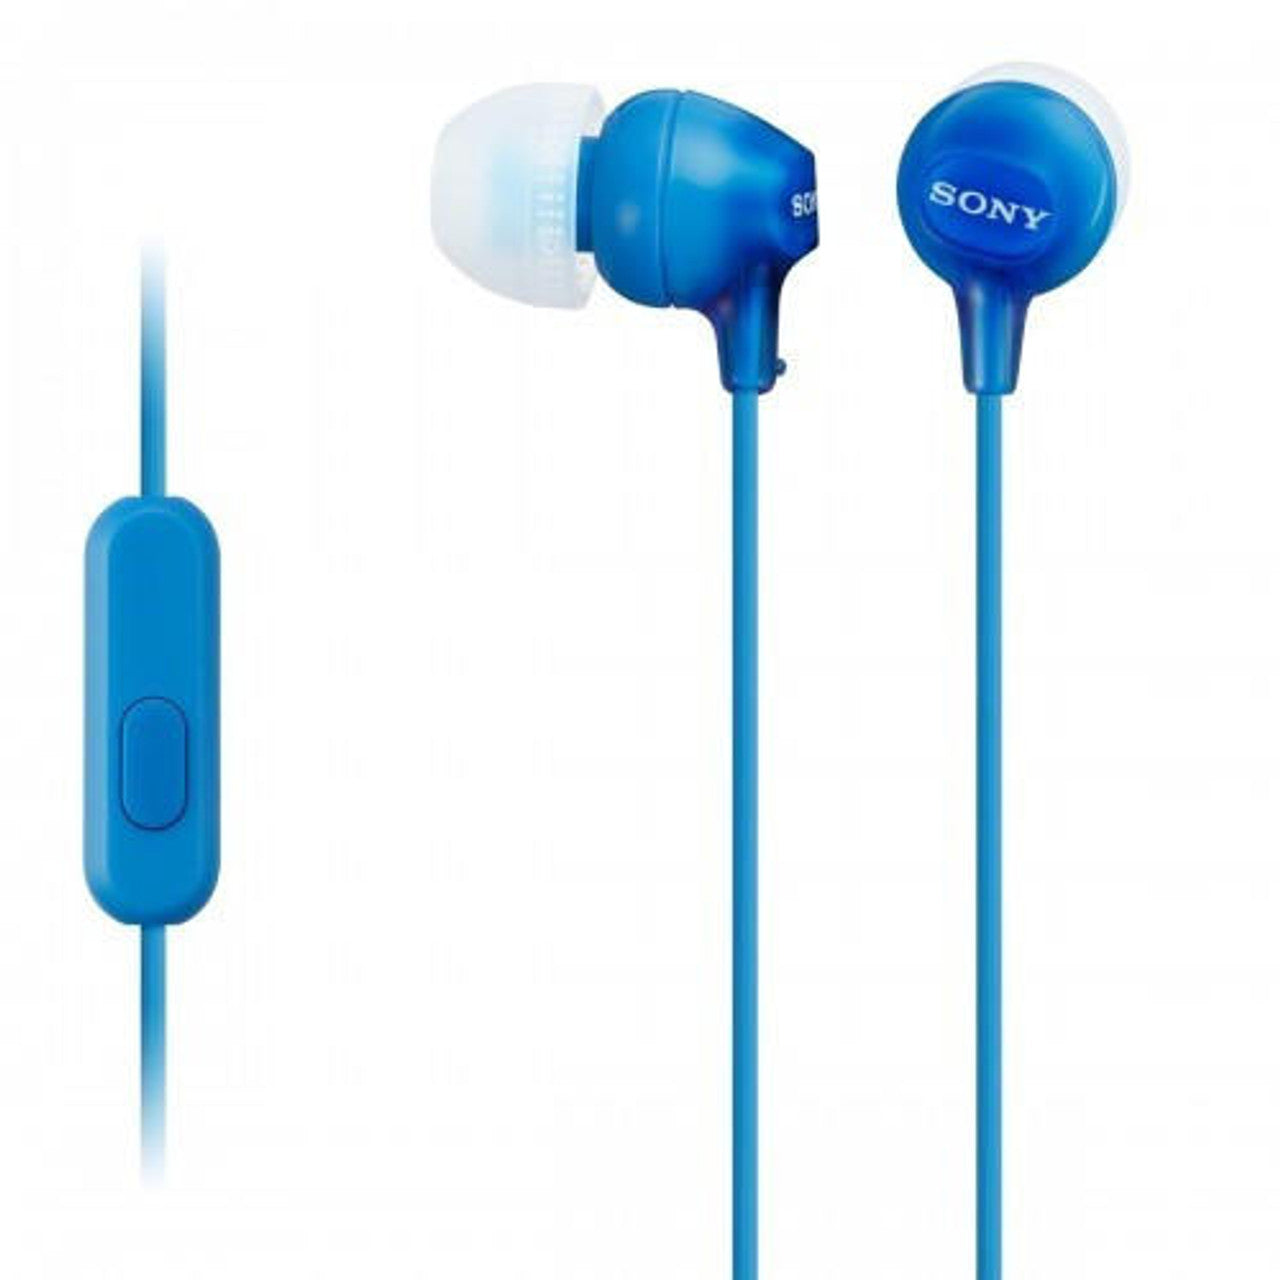 Sony MDR-EX15AP Earphones with Smartphone Mic and Control - Blue